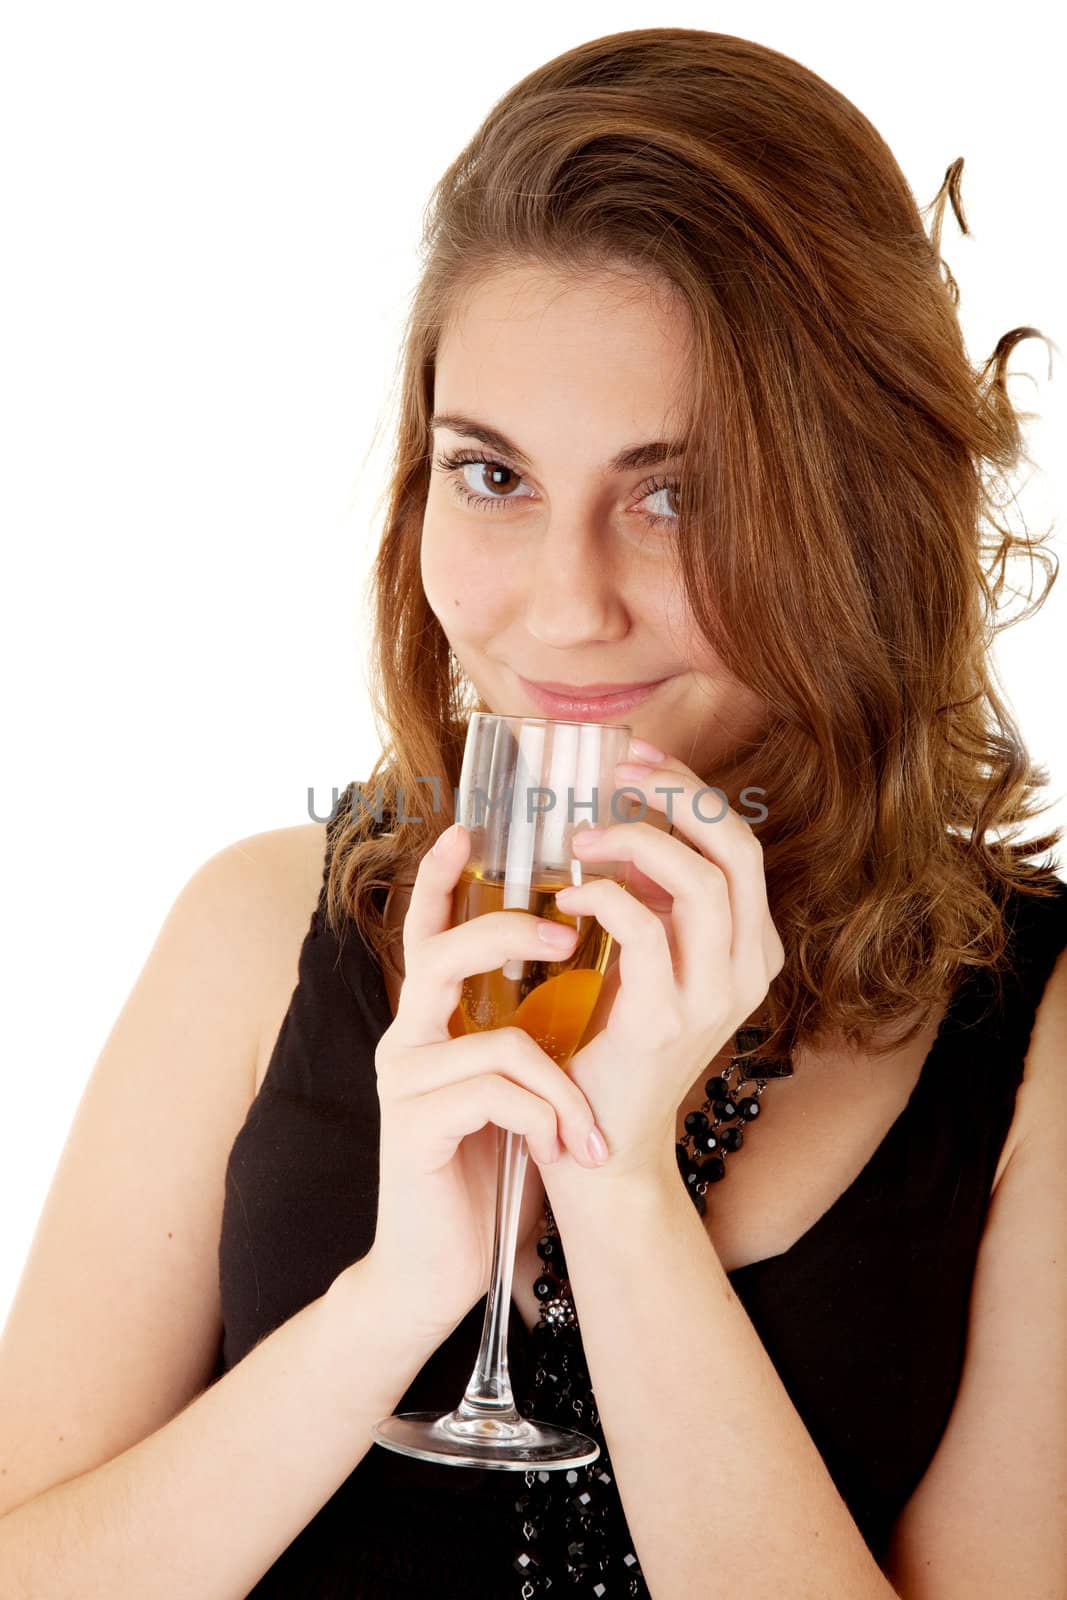 Beautiful woman with a glass with champagne on white background. Focus on woman's eyes.